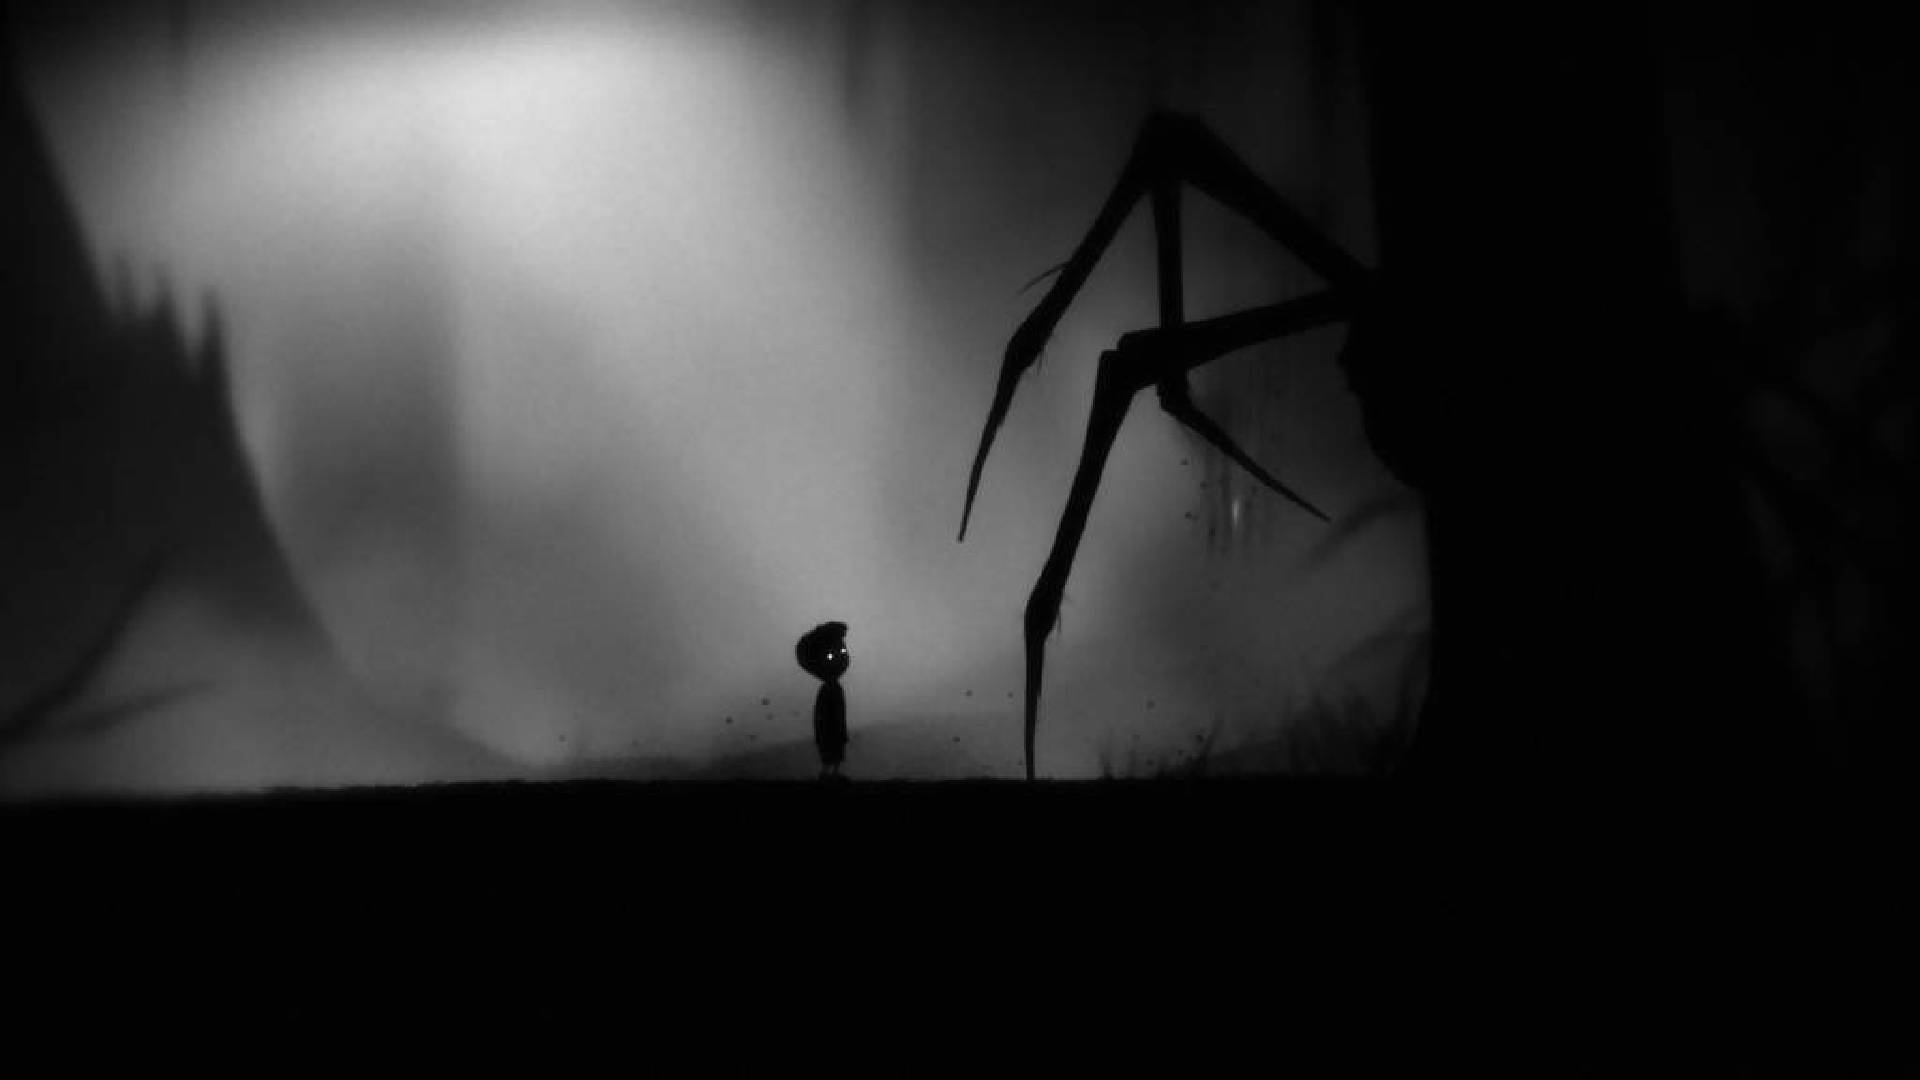 A small boy approaches a spider-like being in the dark